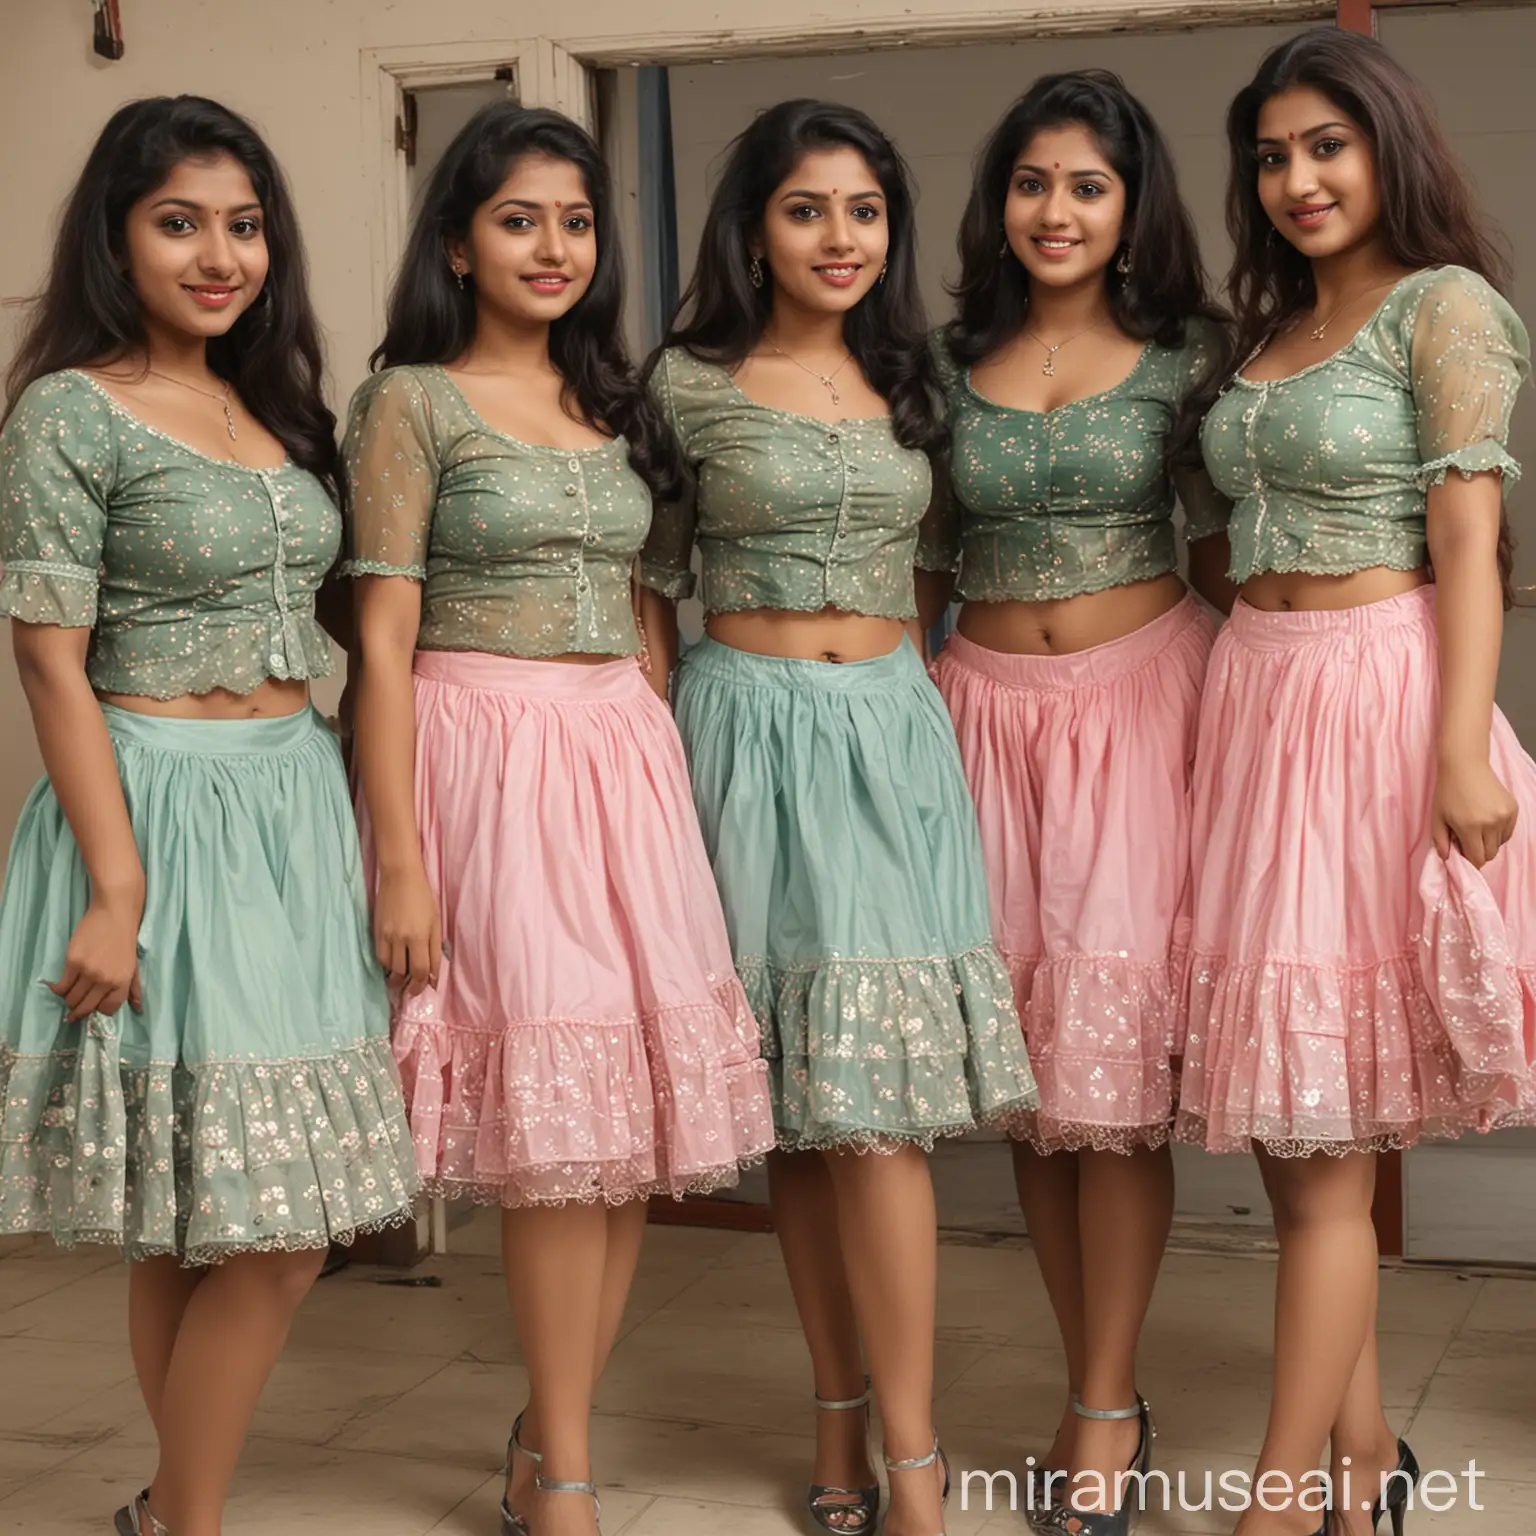 group of sexy indian girls wearing  blouse and petticoat